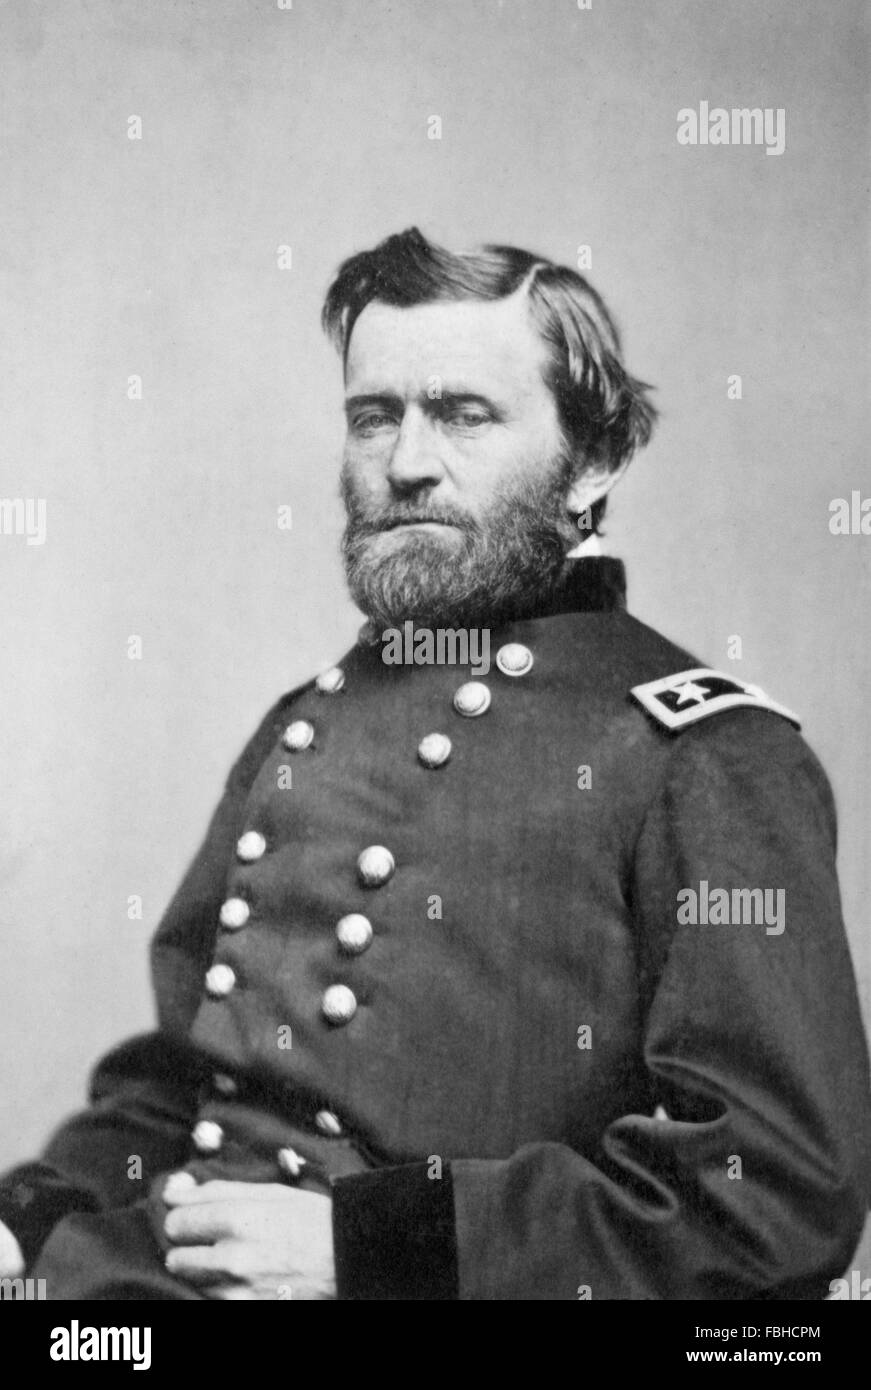 General Ulysses S Grant, 18th President of the USA, in military uniform, c. 1862-1864 Stock Photo